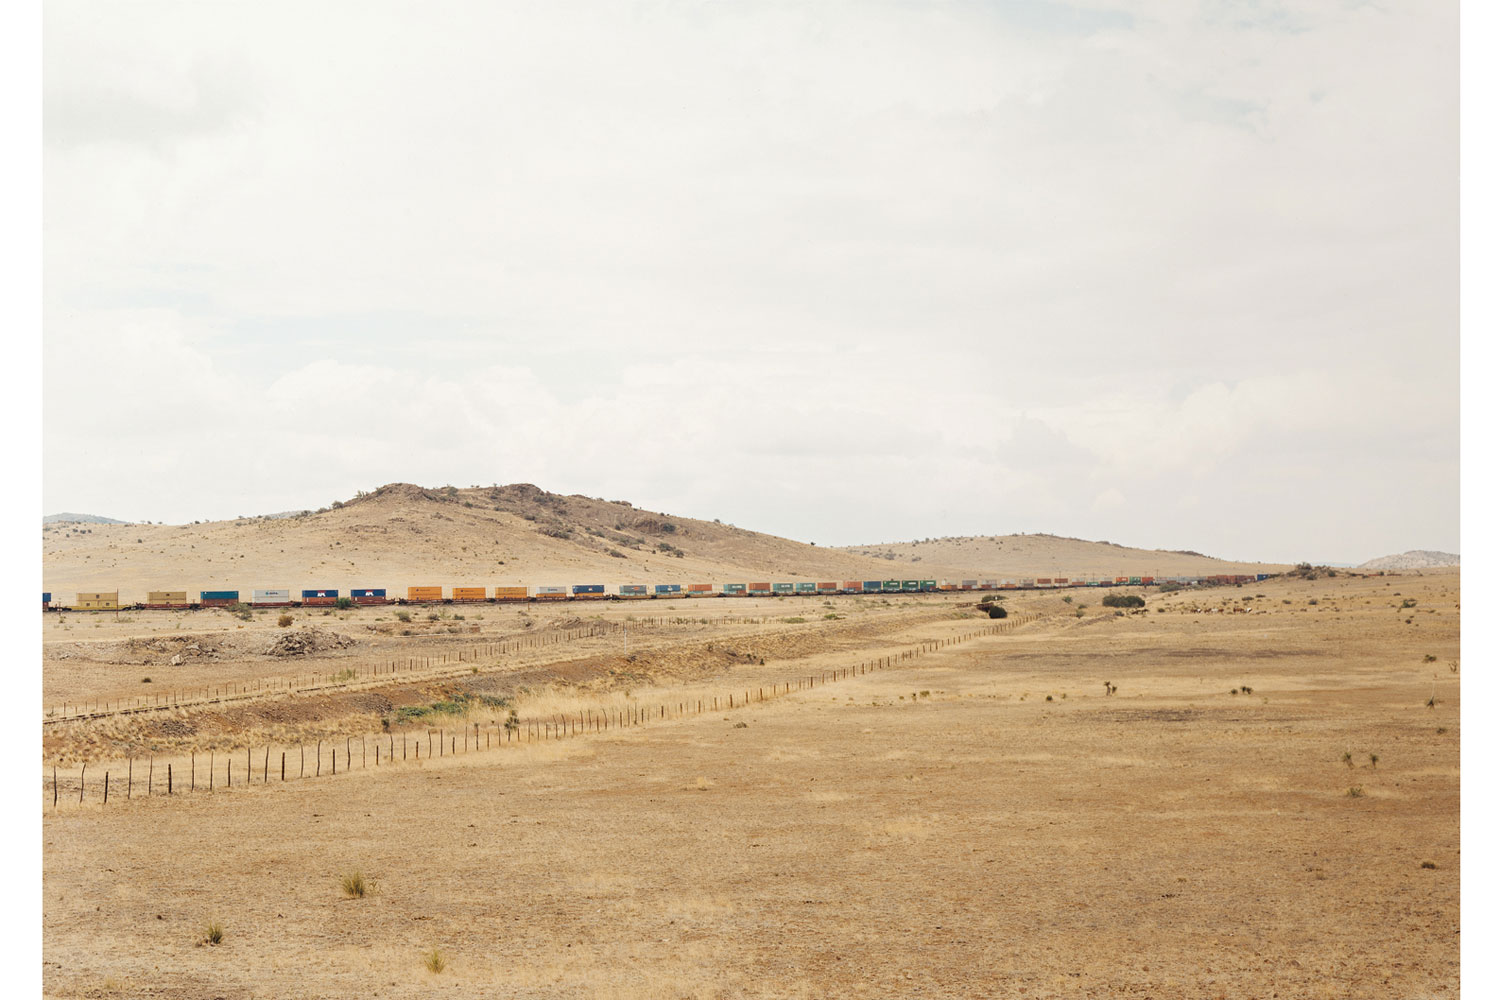 Untitled (Moving container train), Marfa, Texas, 2002